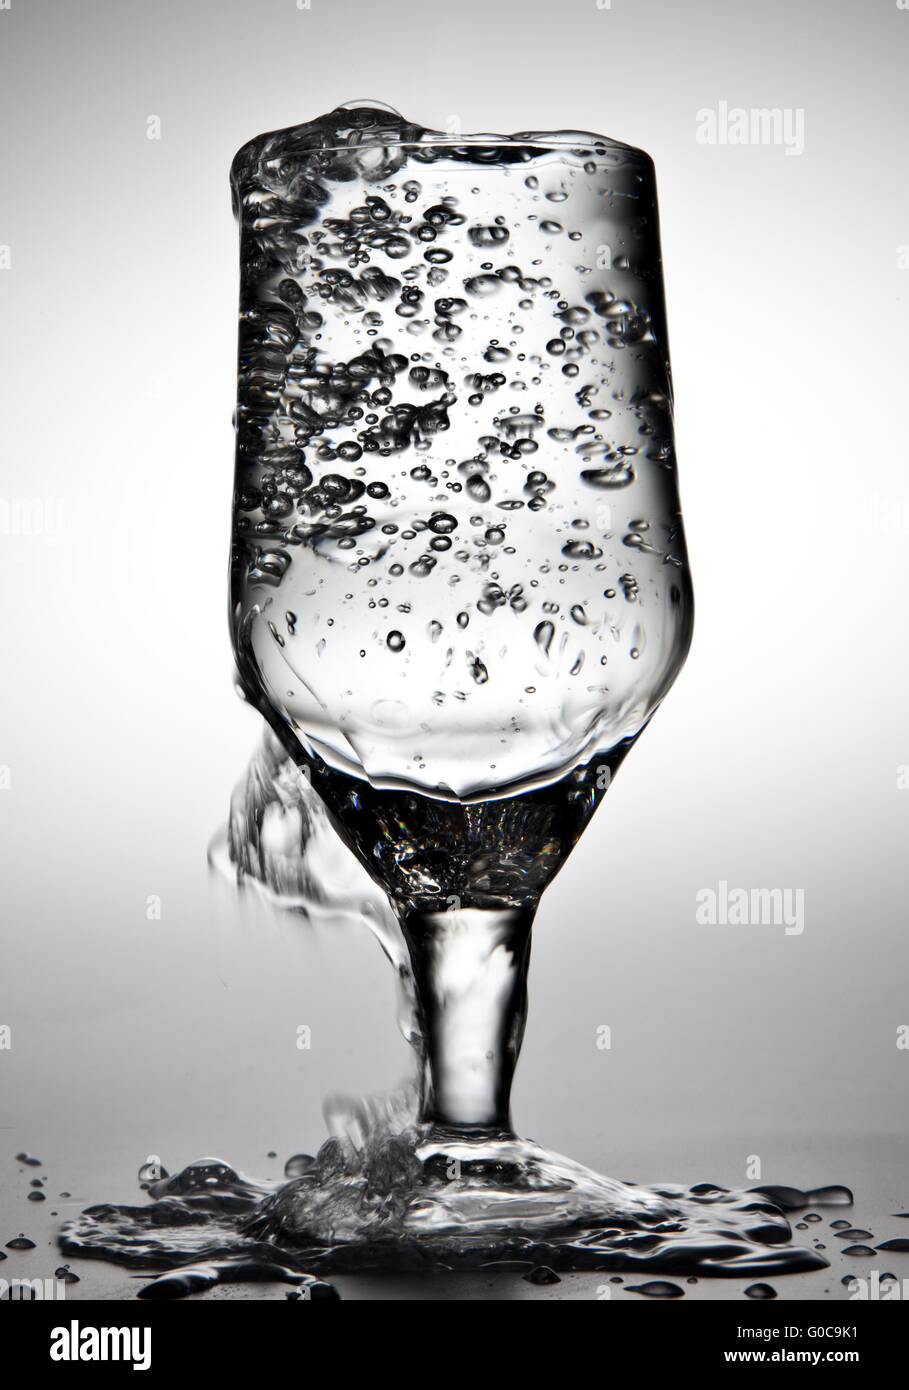 Water is being poured into a glass Stock Photo